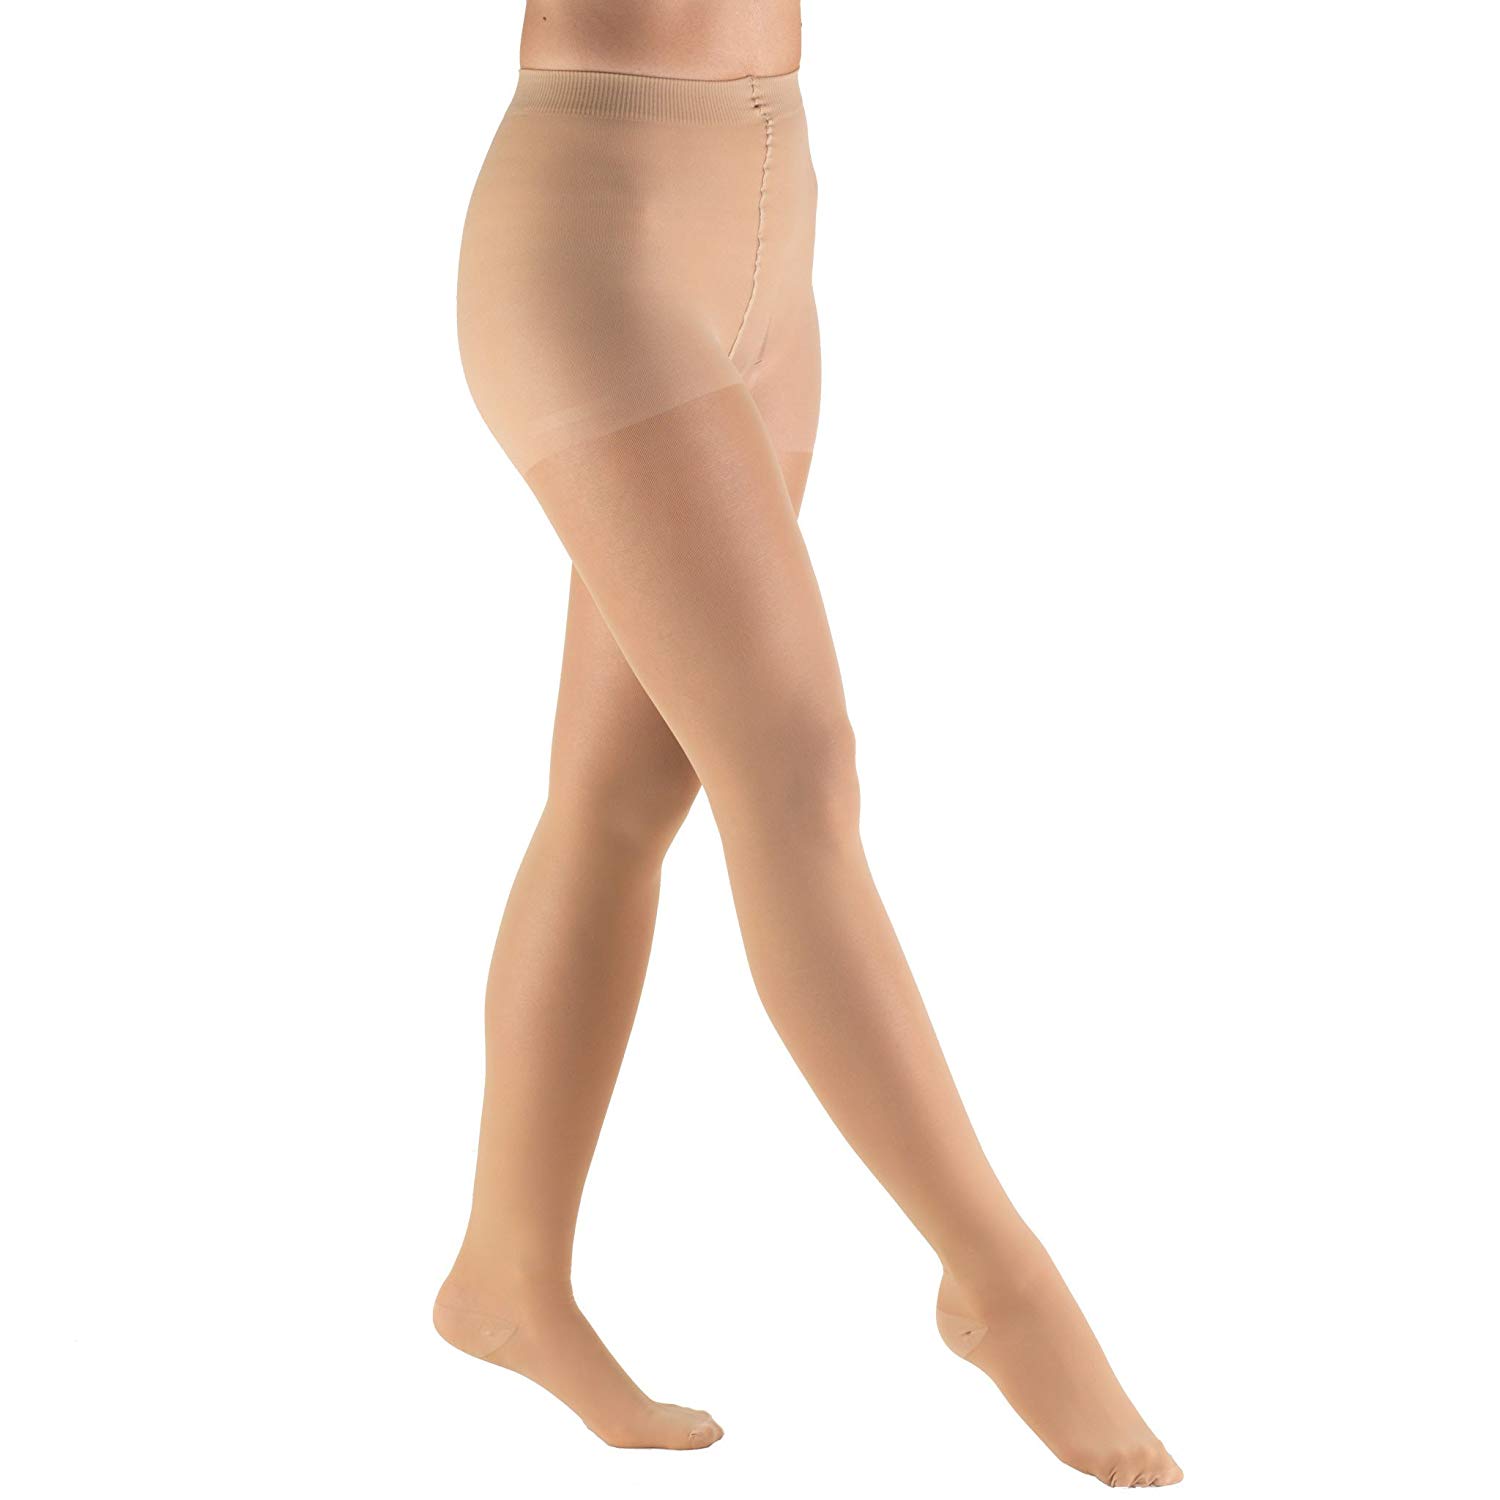 What is the difference between compression pantyhose and regular tights? 1